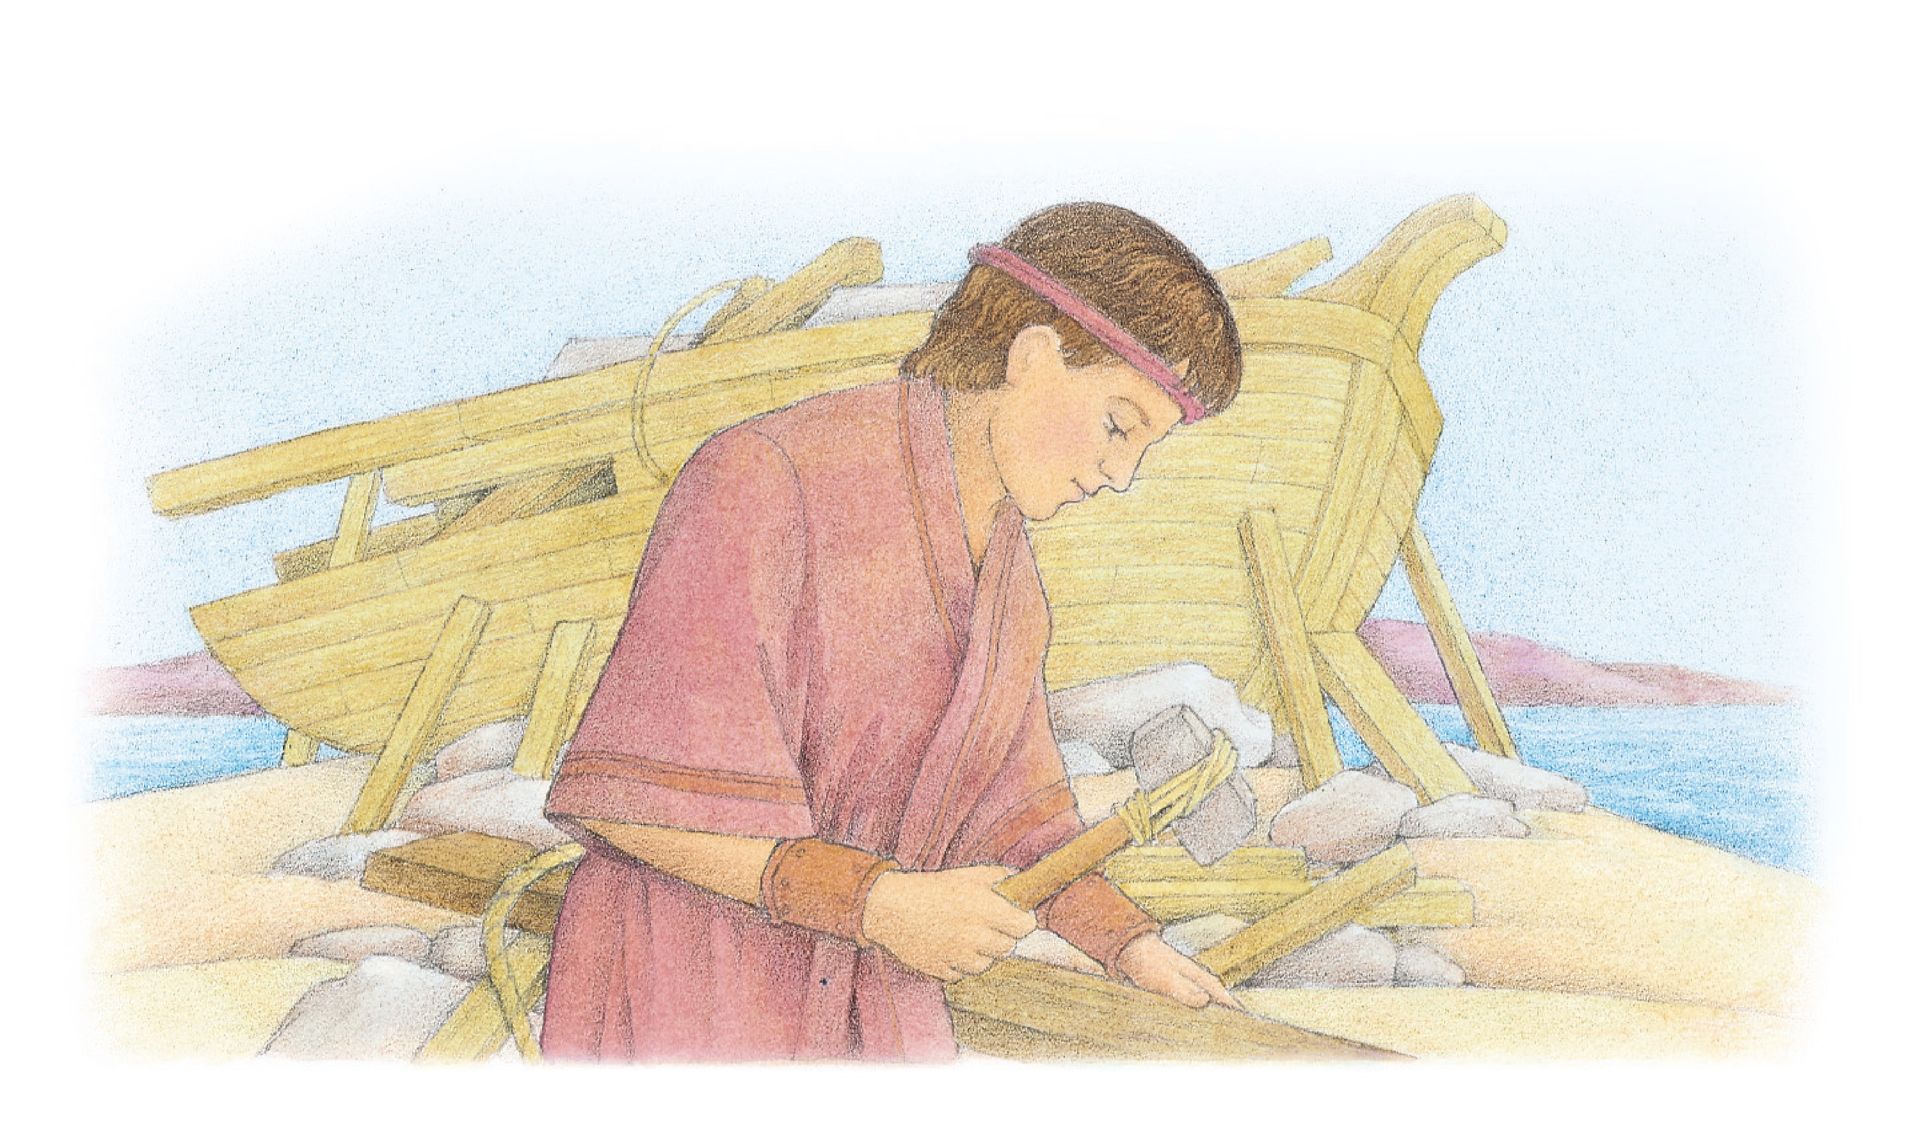 Nephi working to construct a ship. From the Children’s Songbook, page 120, “Nephi’s Courage”; watercolor illustration by Beth Whittaker.